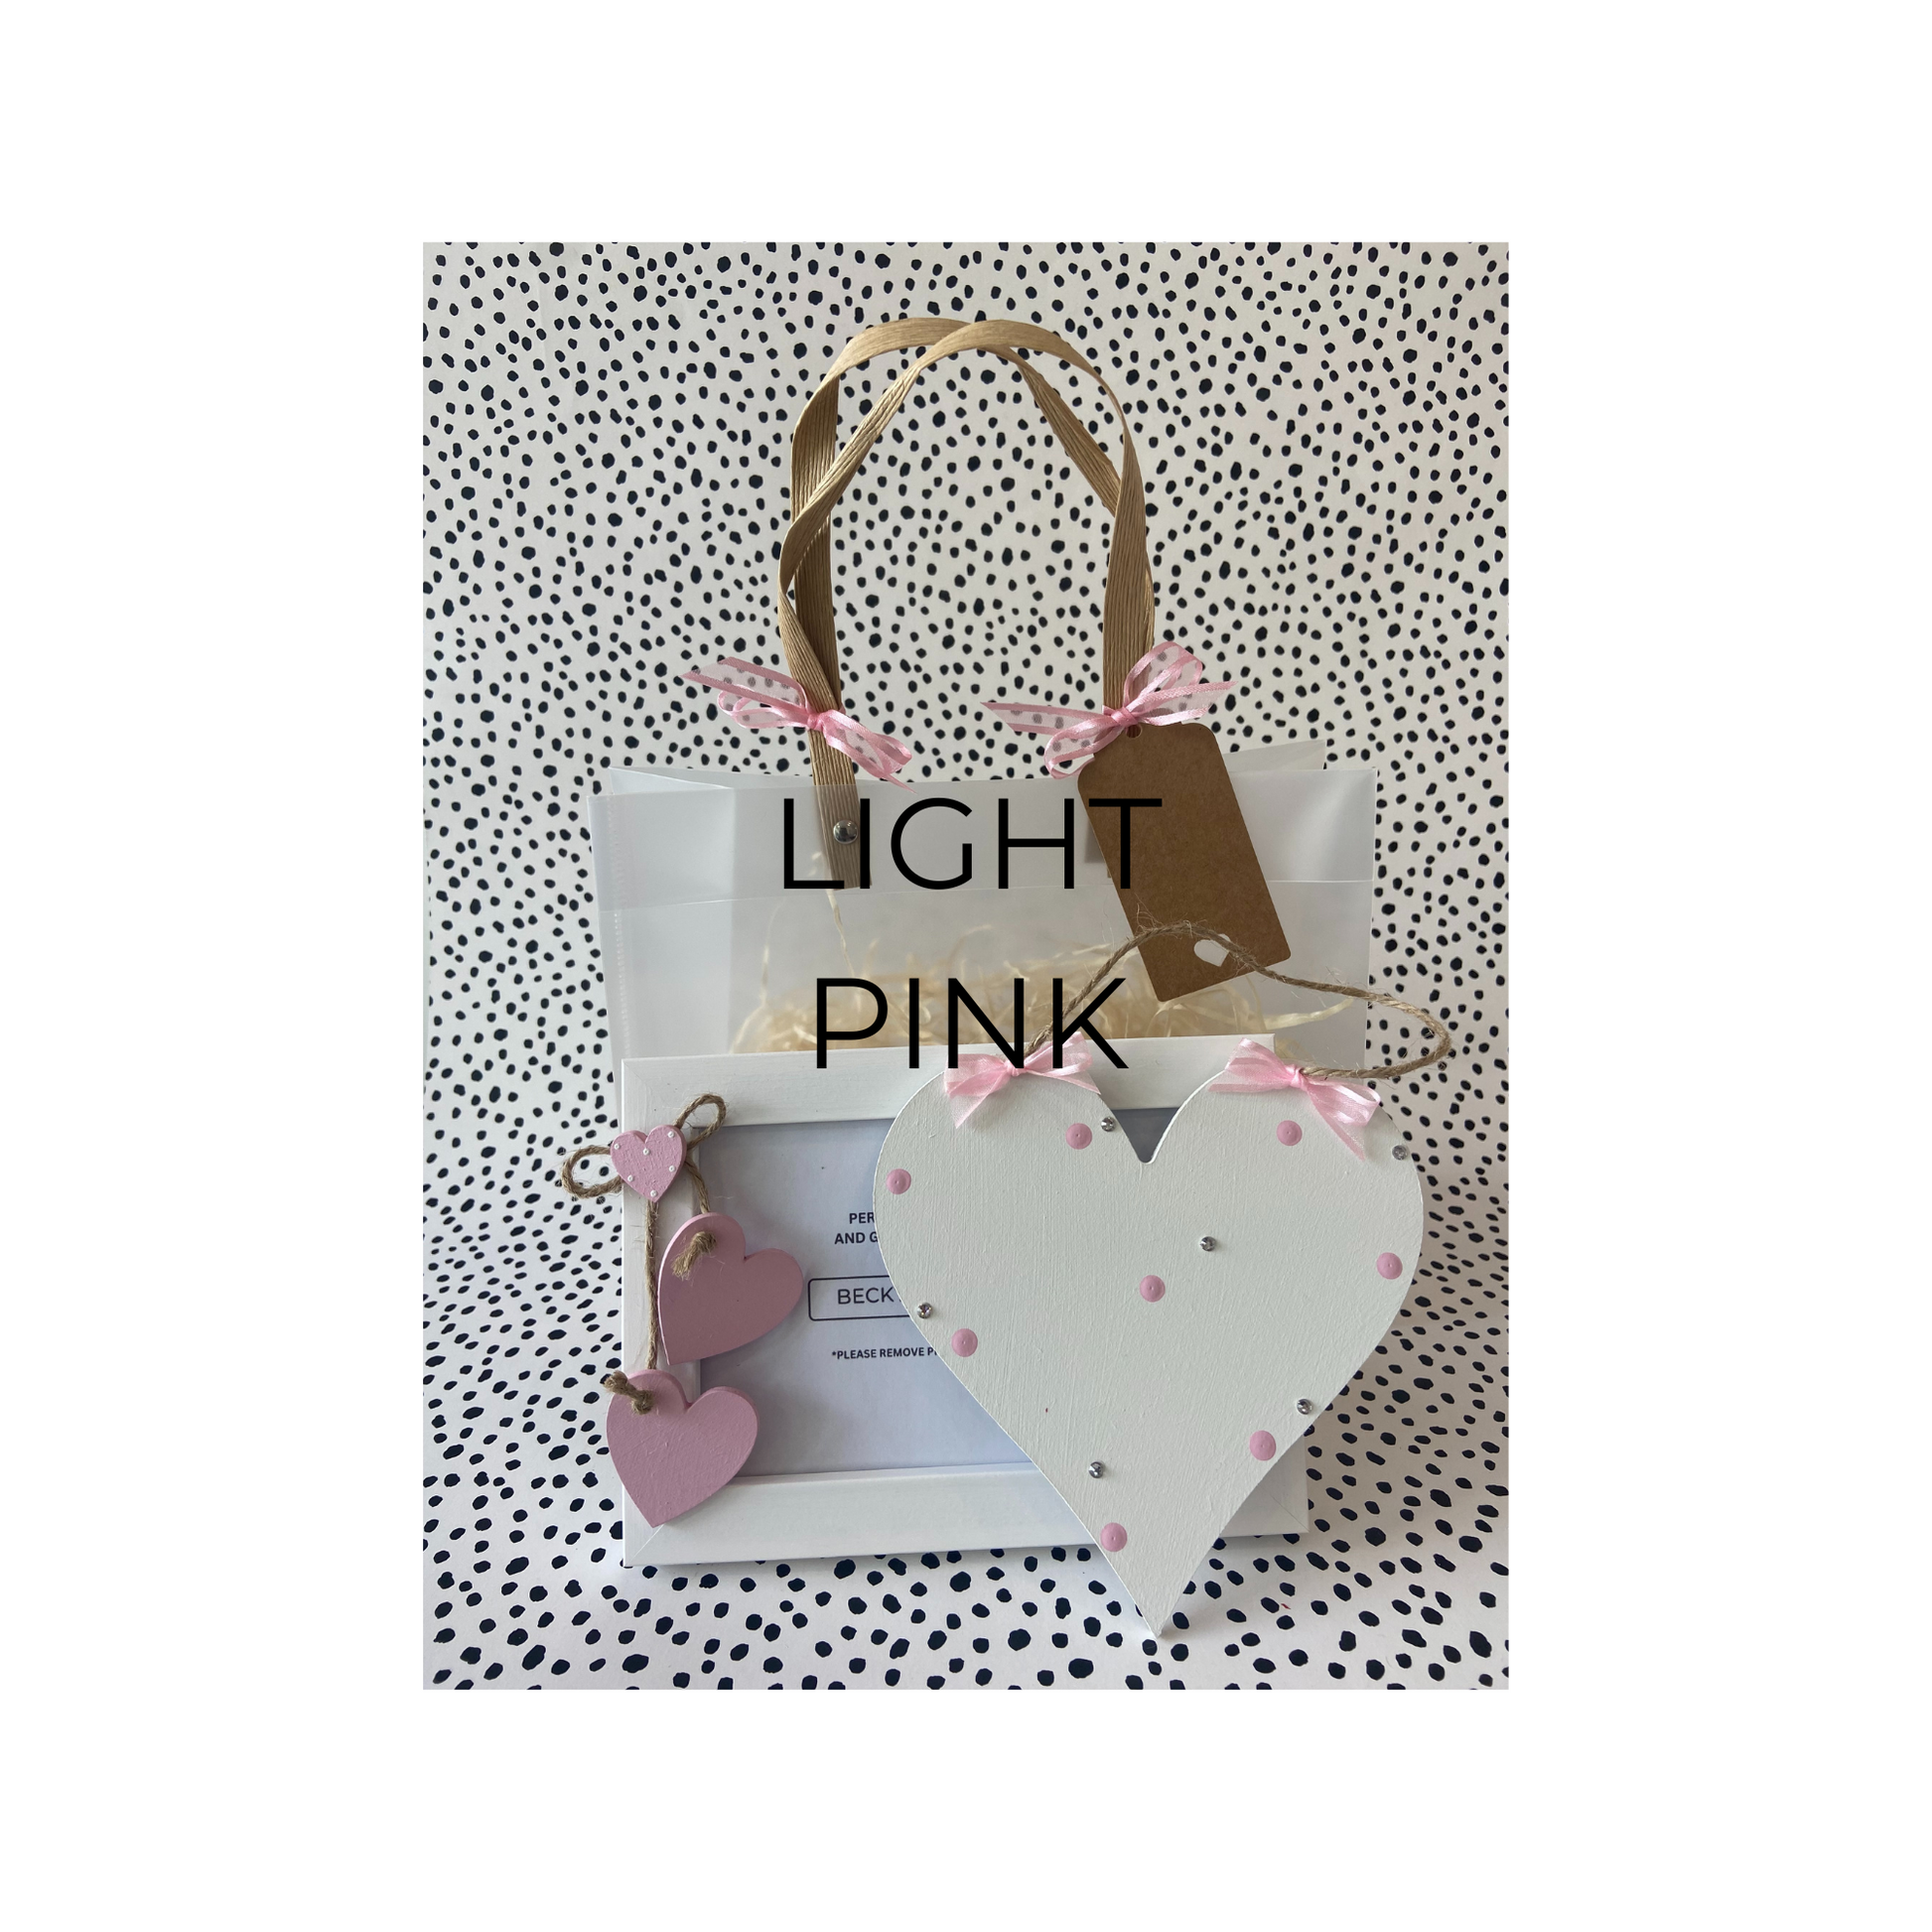 Image shows an example of a light pink gift set